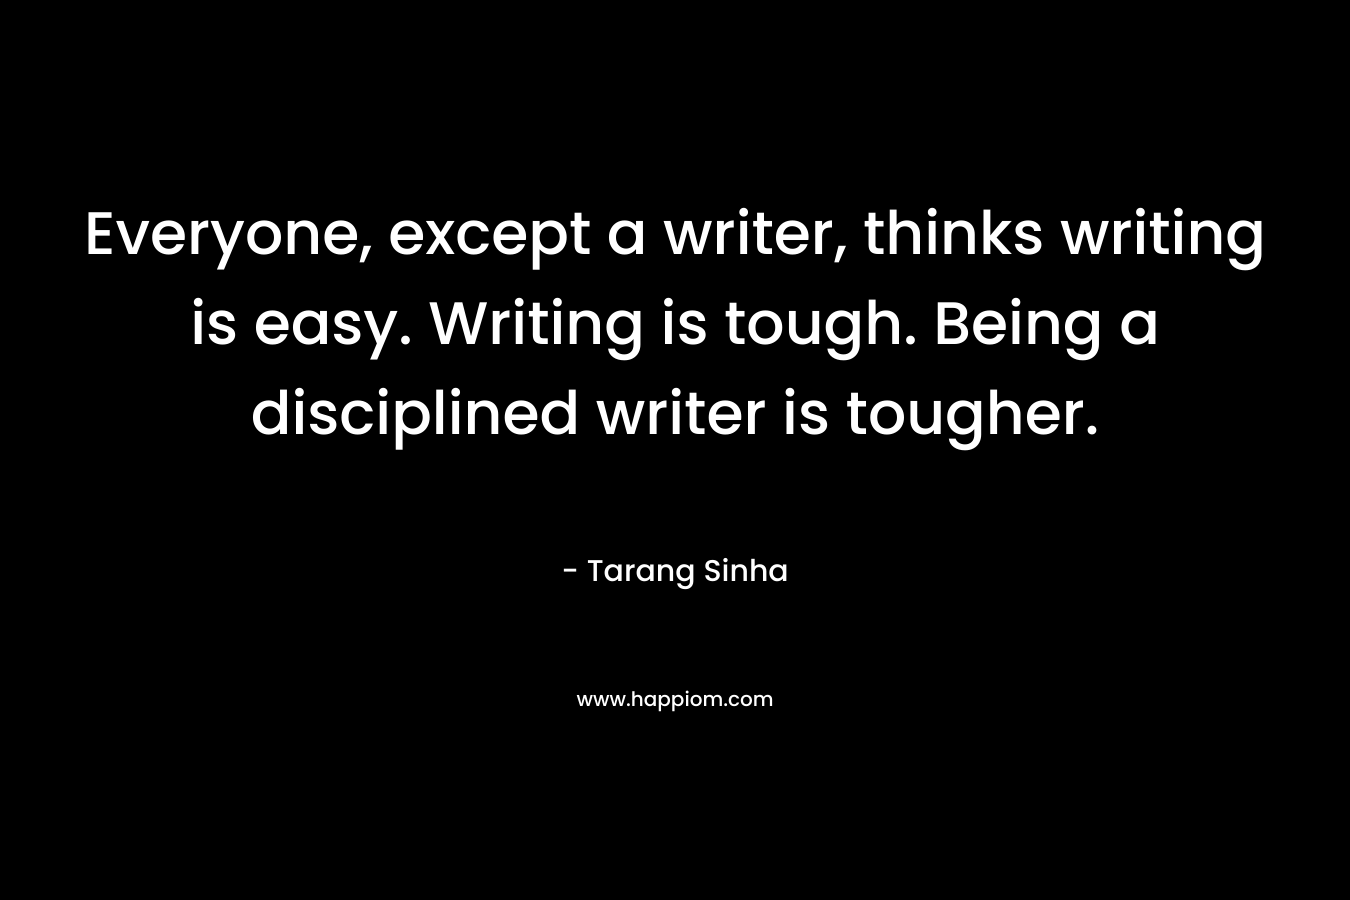 Everyone, except a writer, thinks writing is easy. Writing is tough. Being a disciplined writer is tougher. – Tarang Sinha